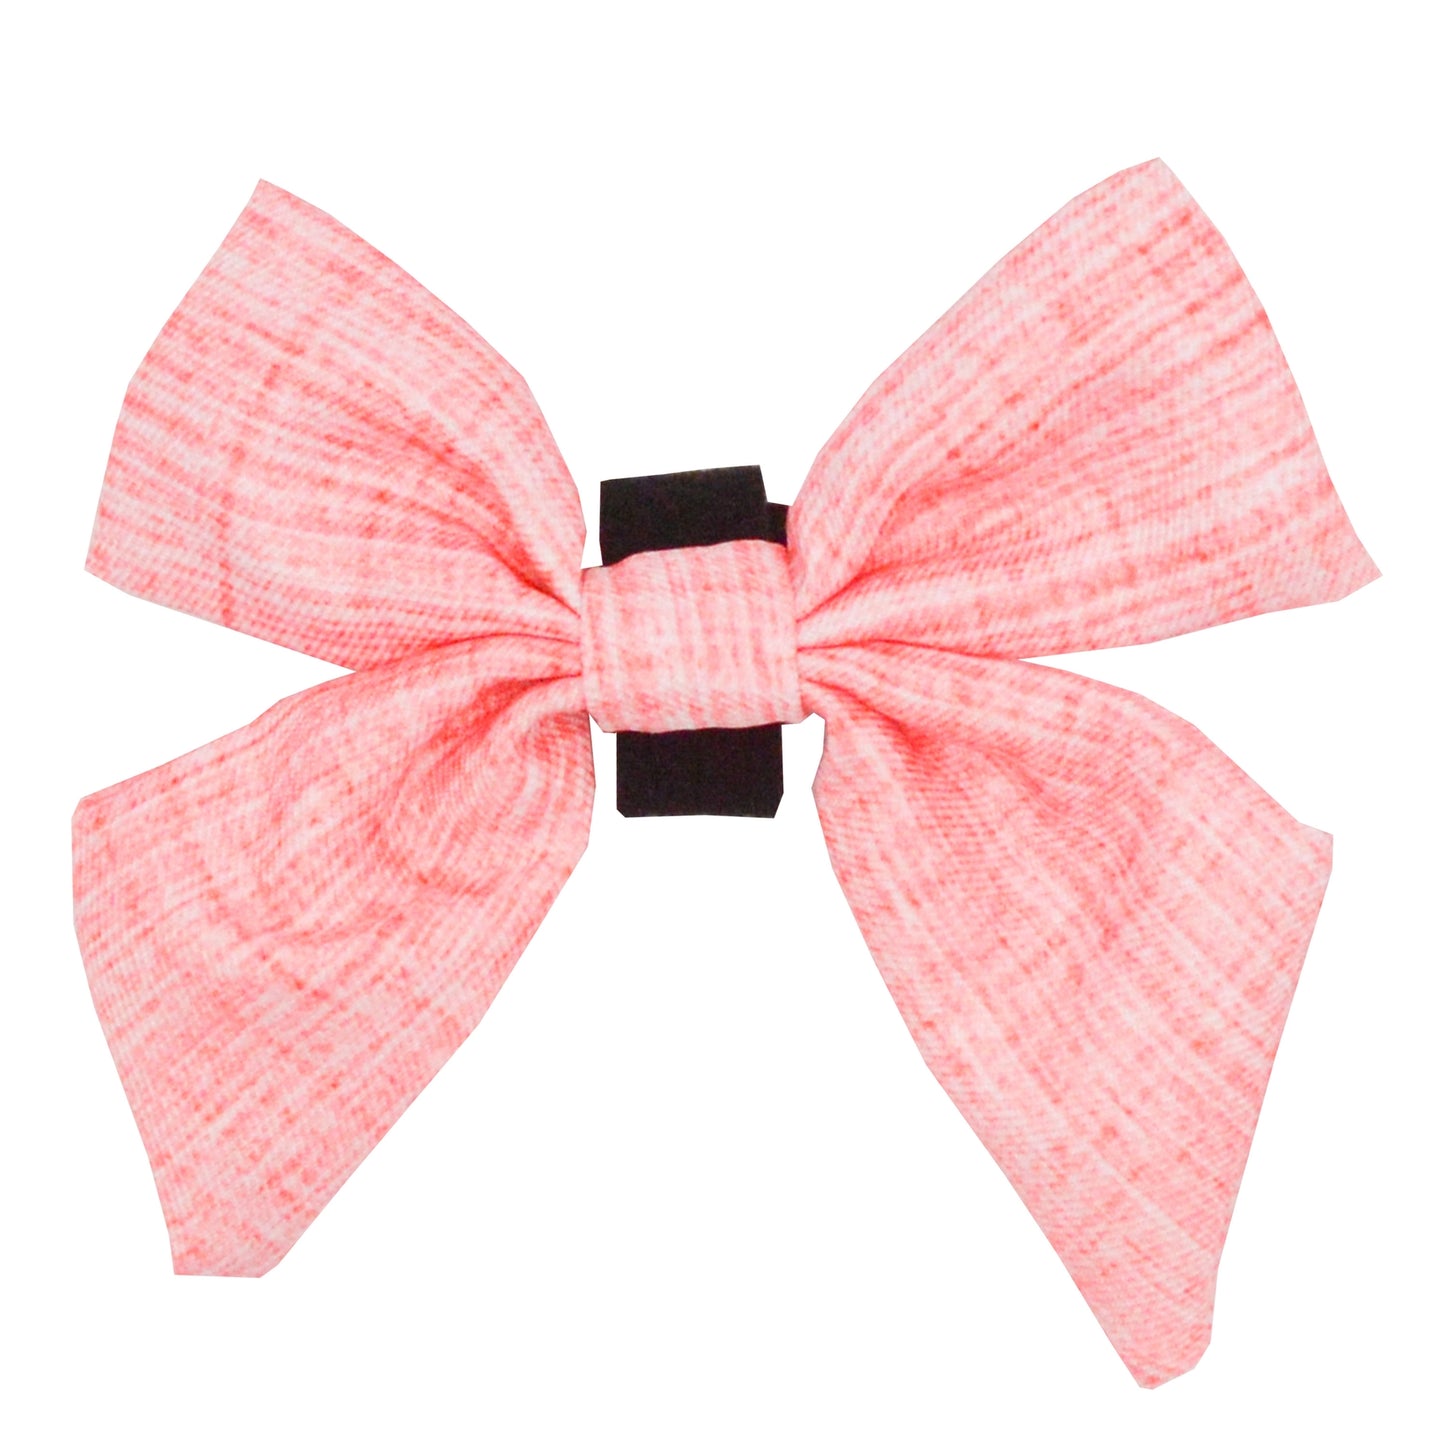 Dolce Rose Sailor Bow